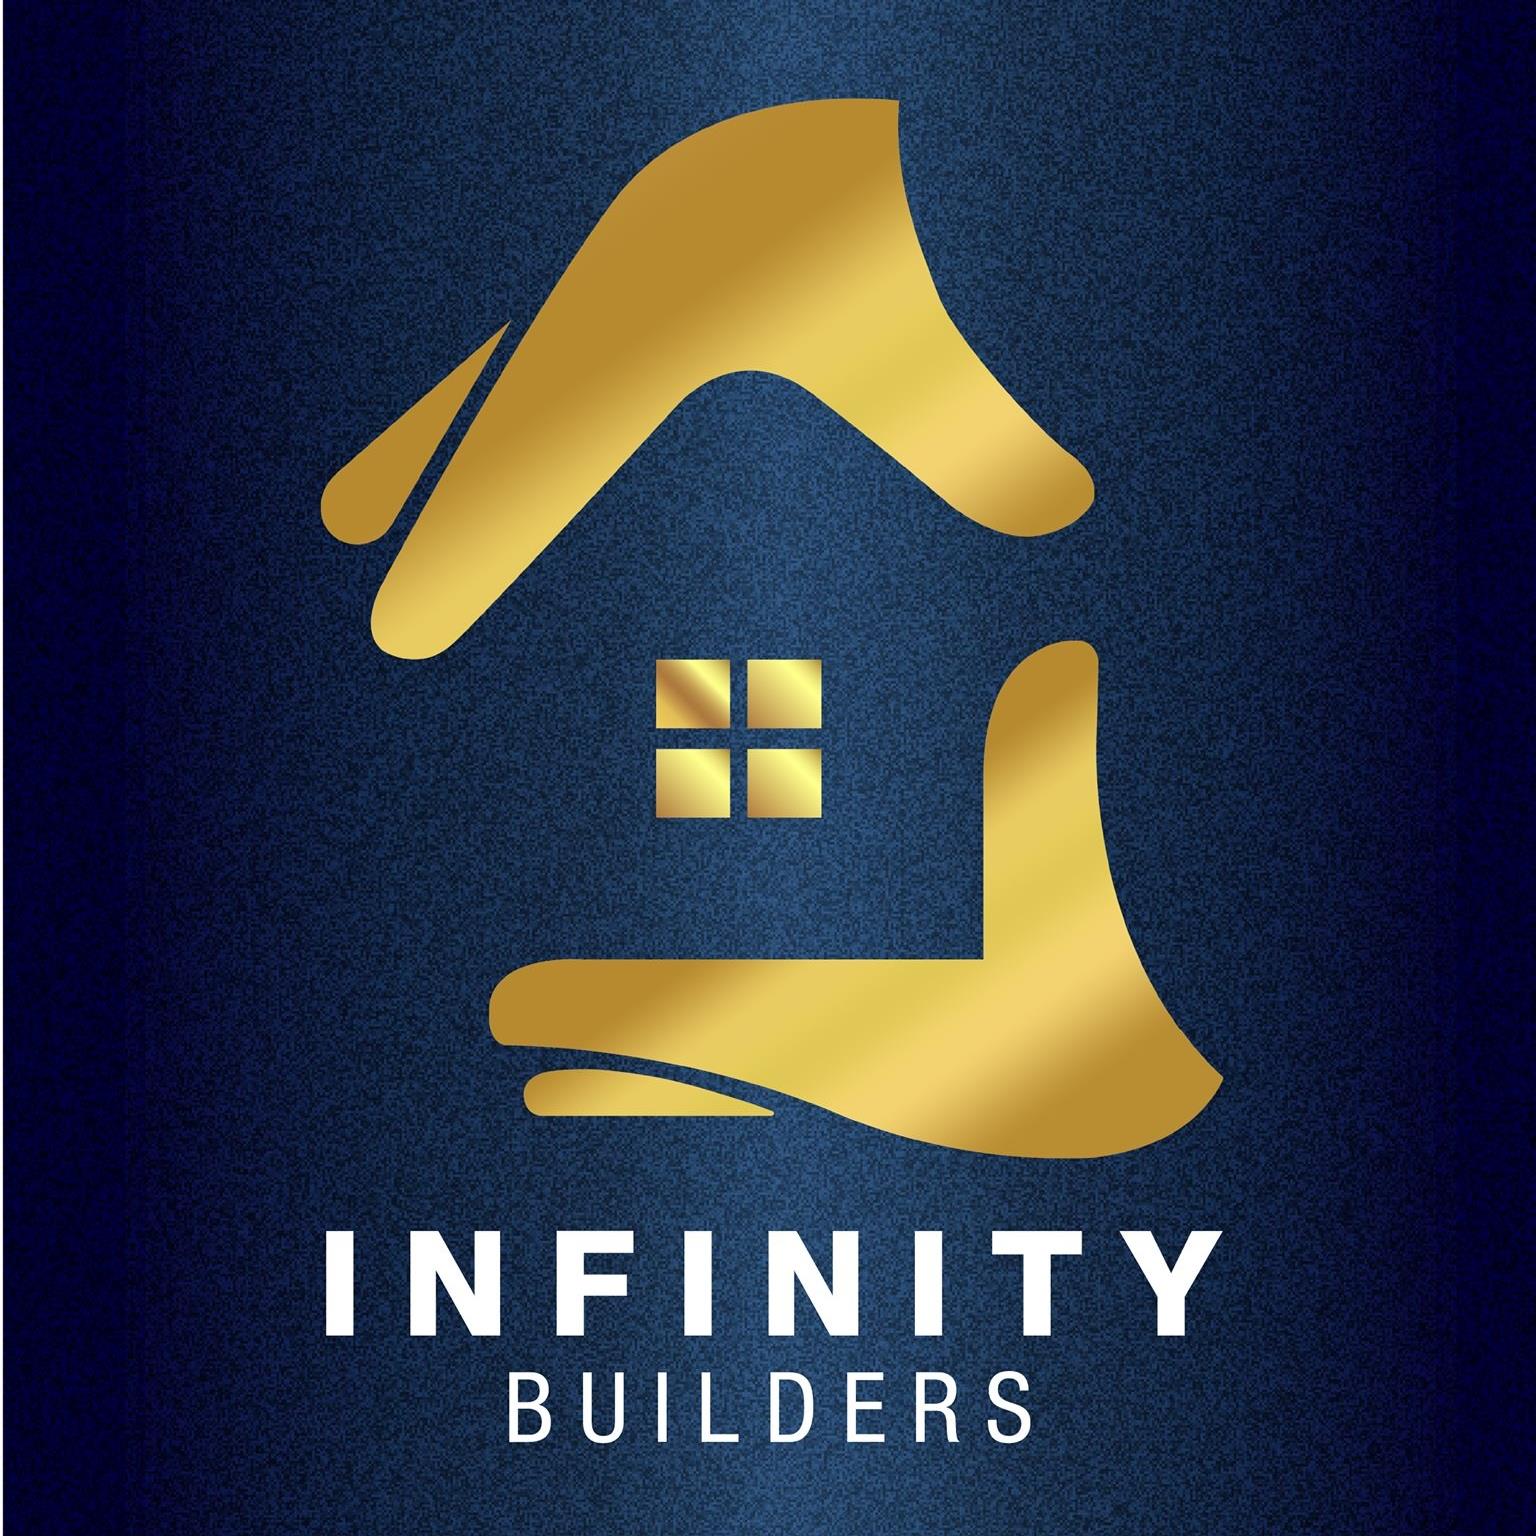 Infinity builders and design